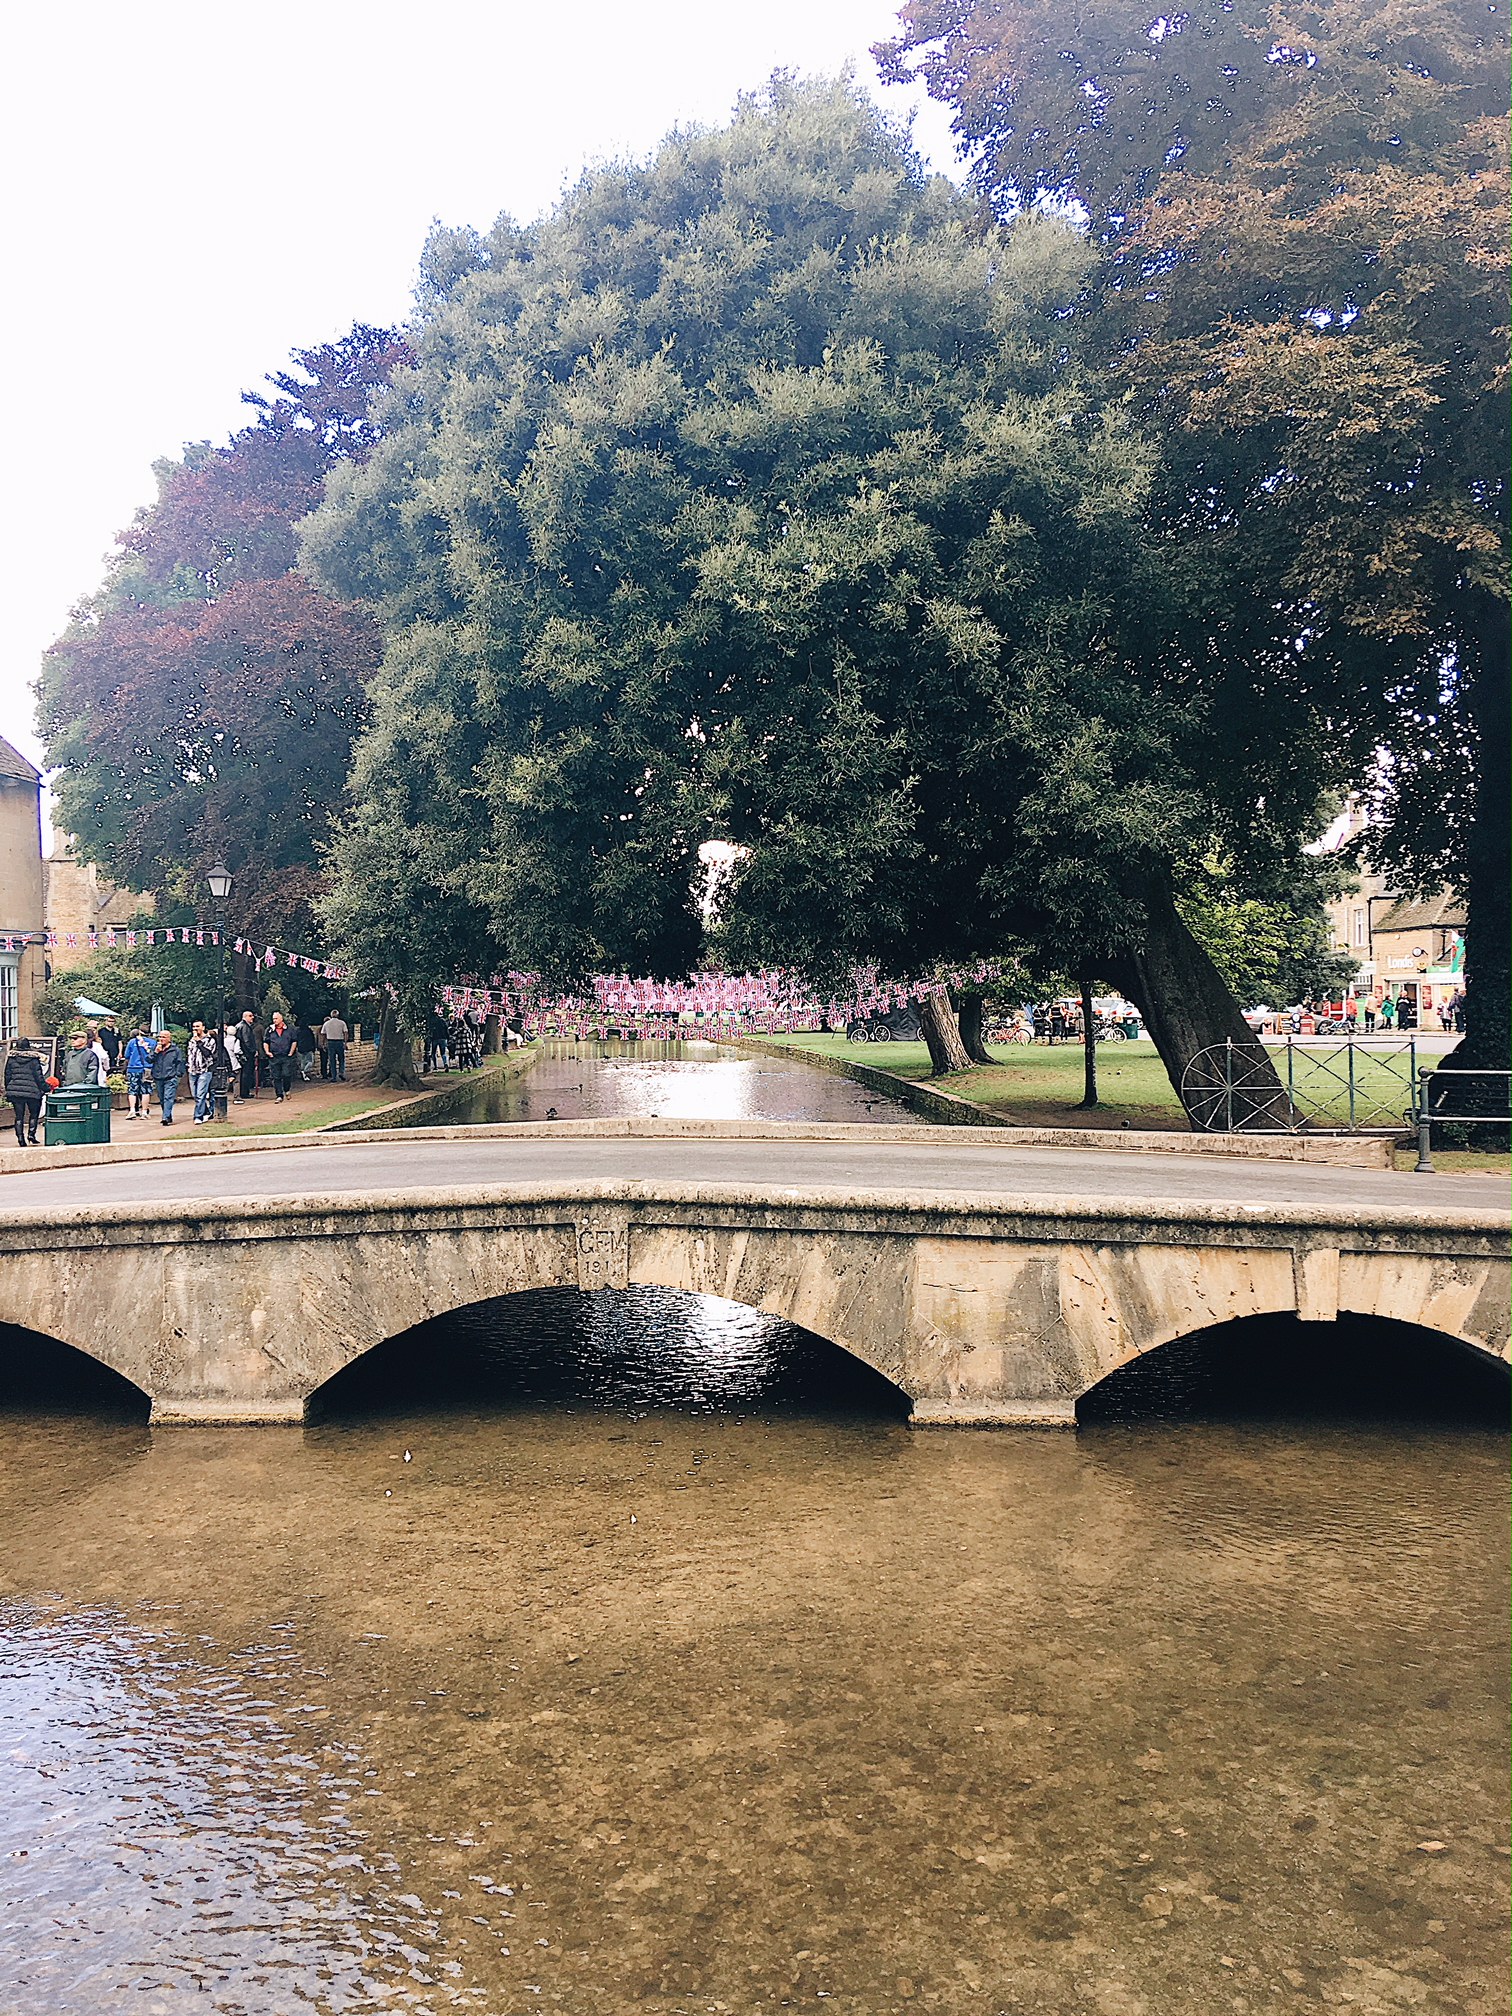 Bridges over River Windrush in Bourton-on-the-Water